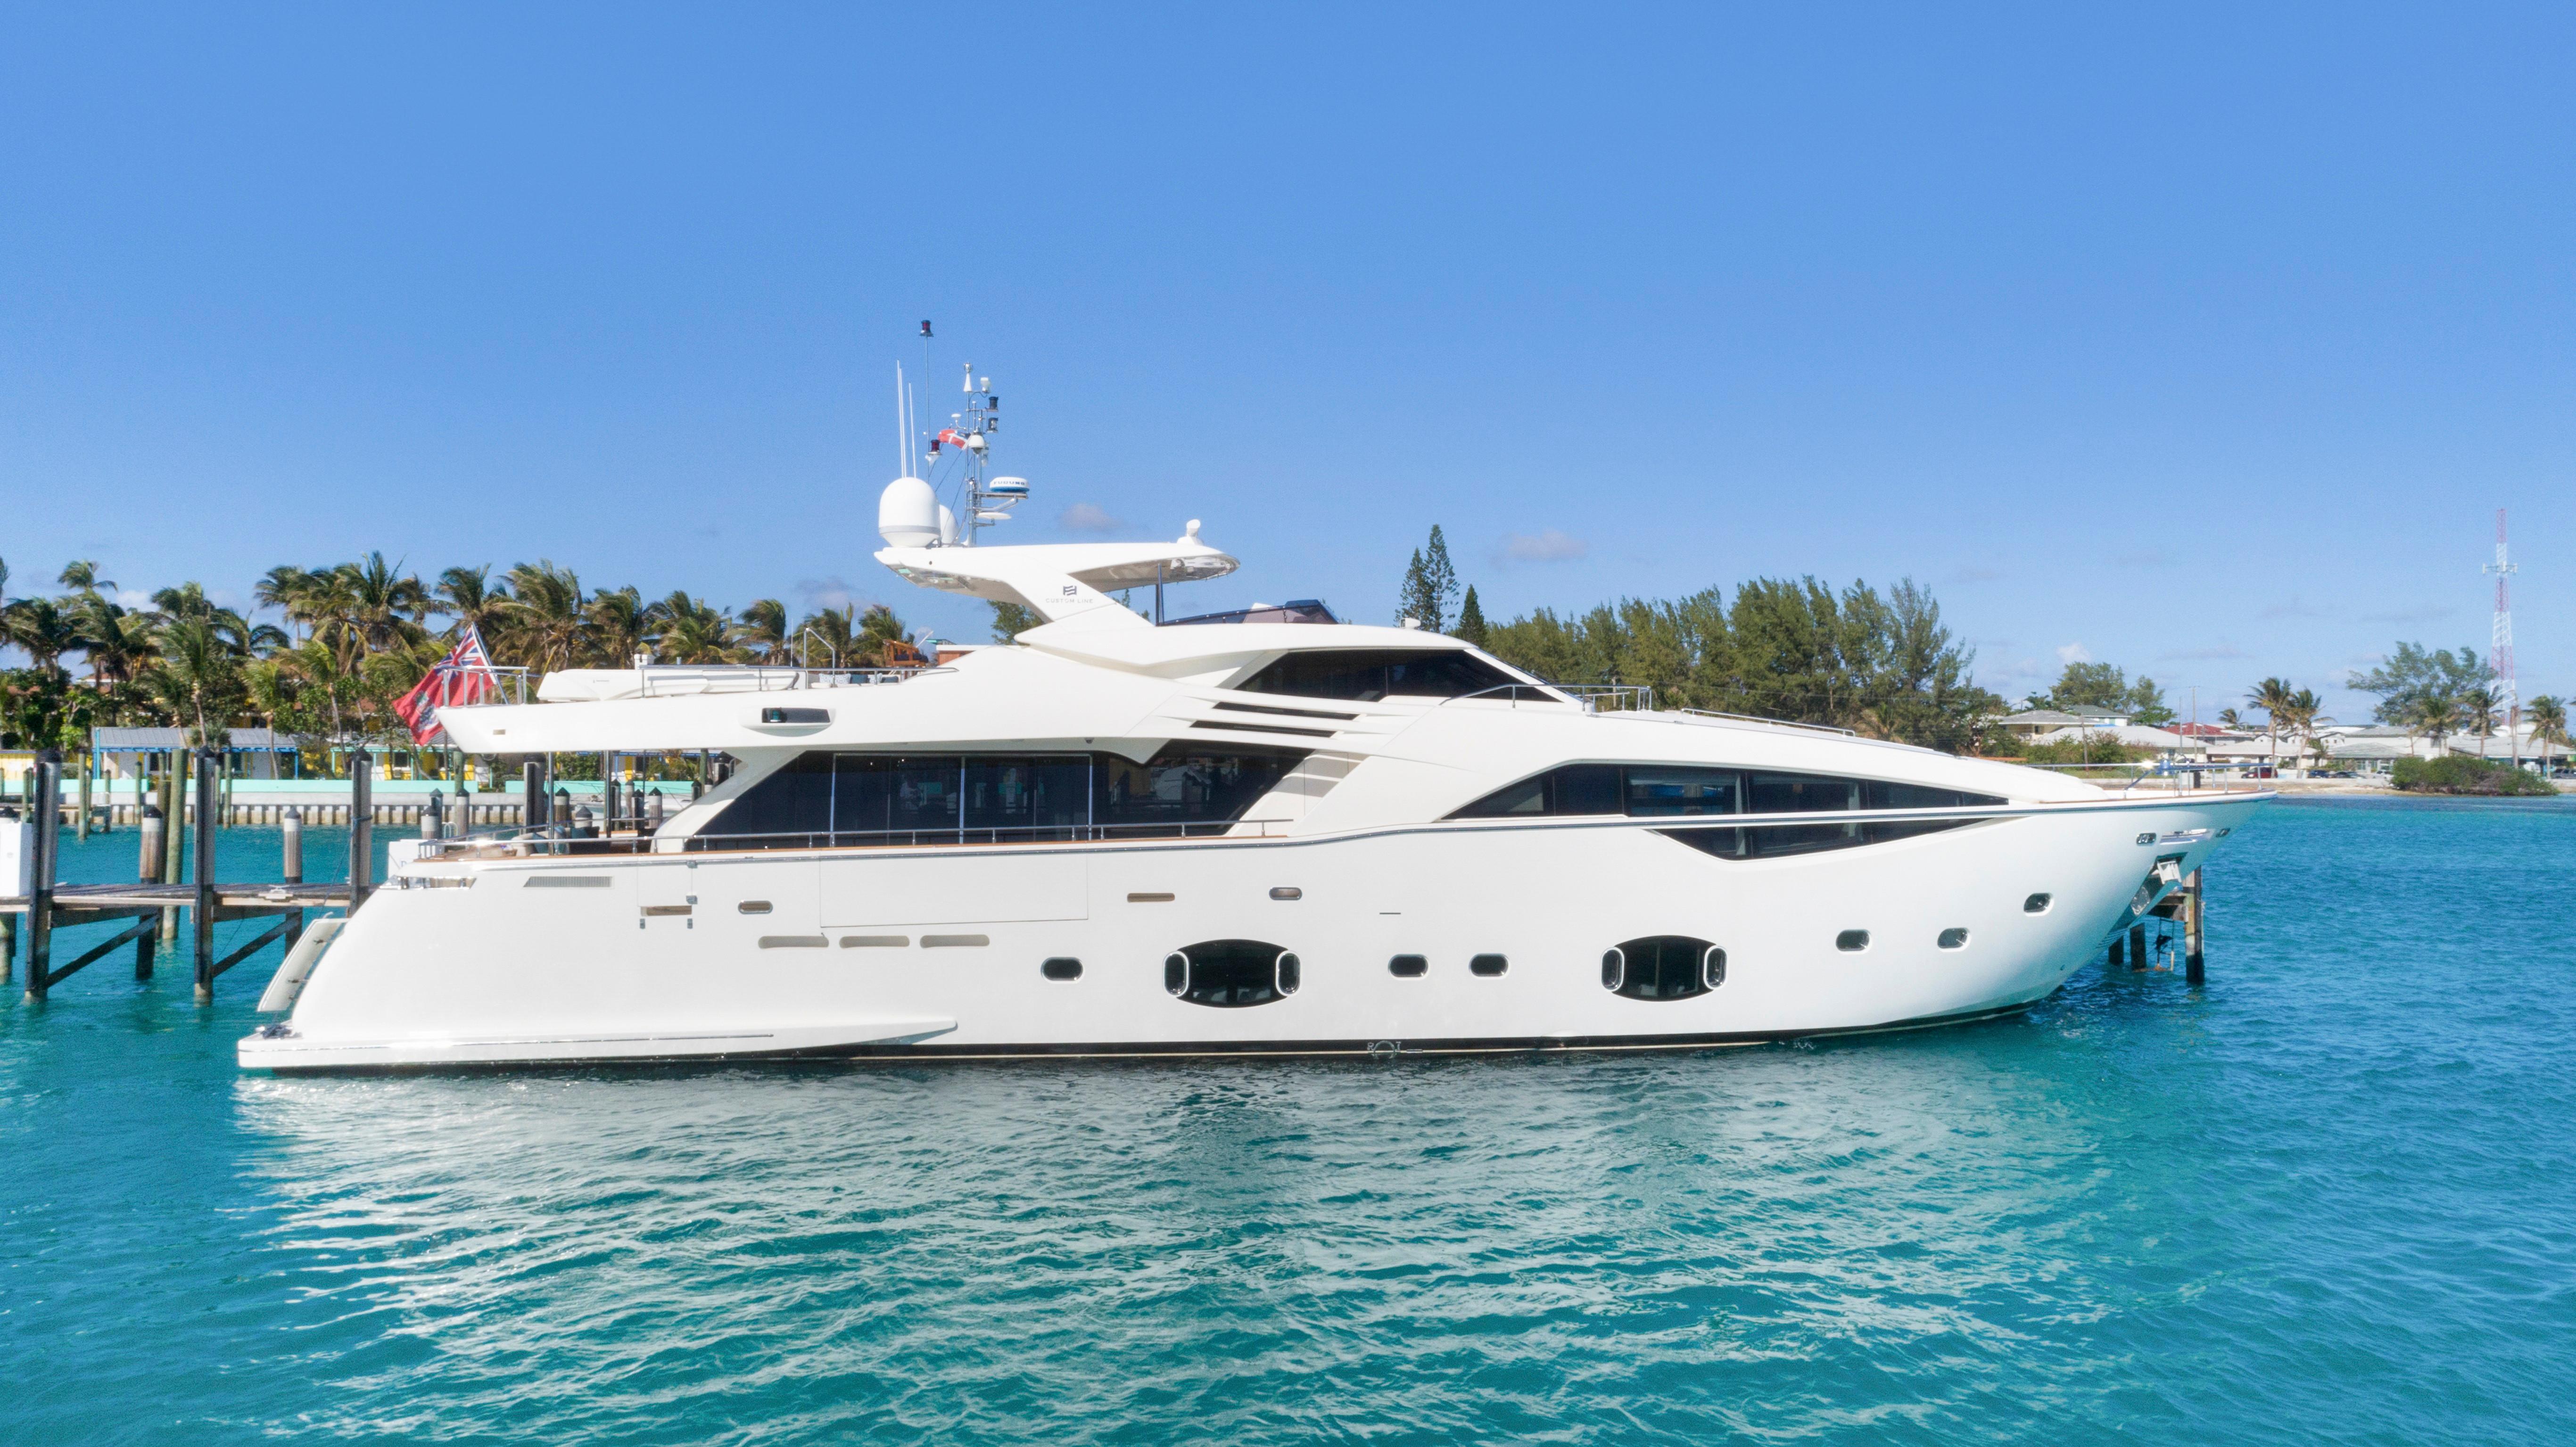 amore mio yacht for sale